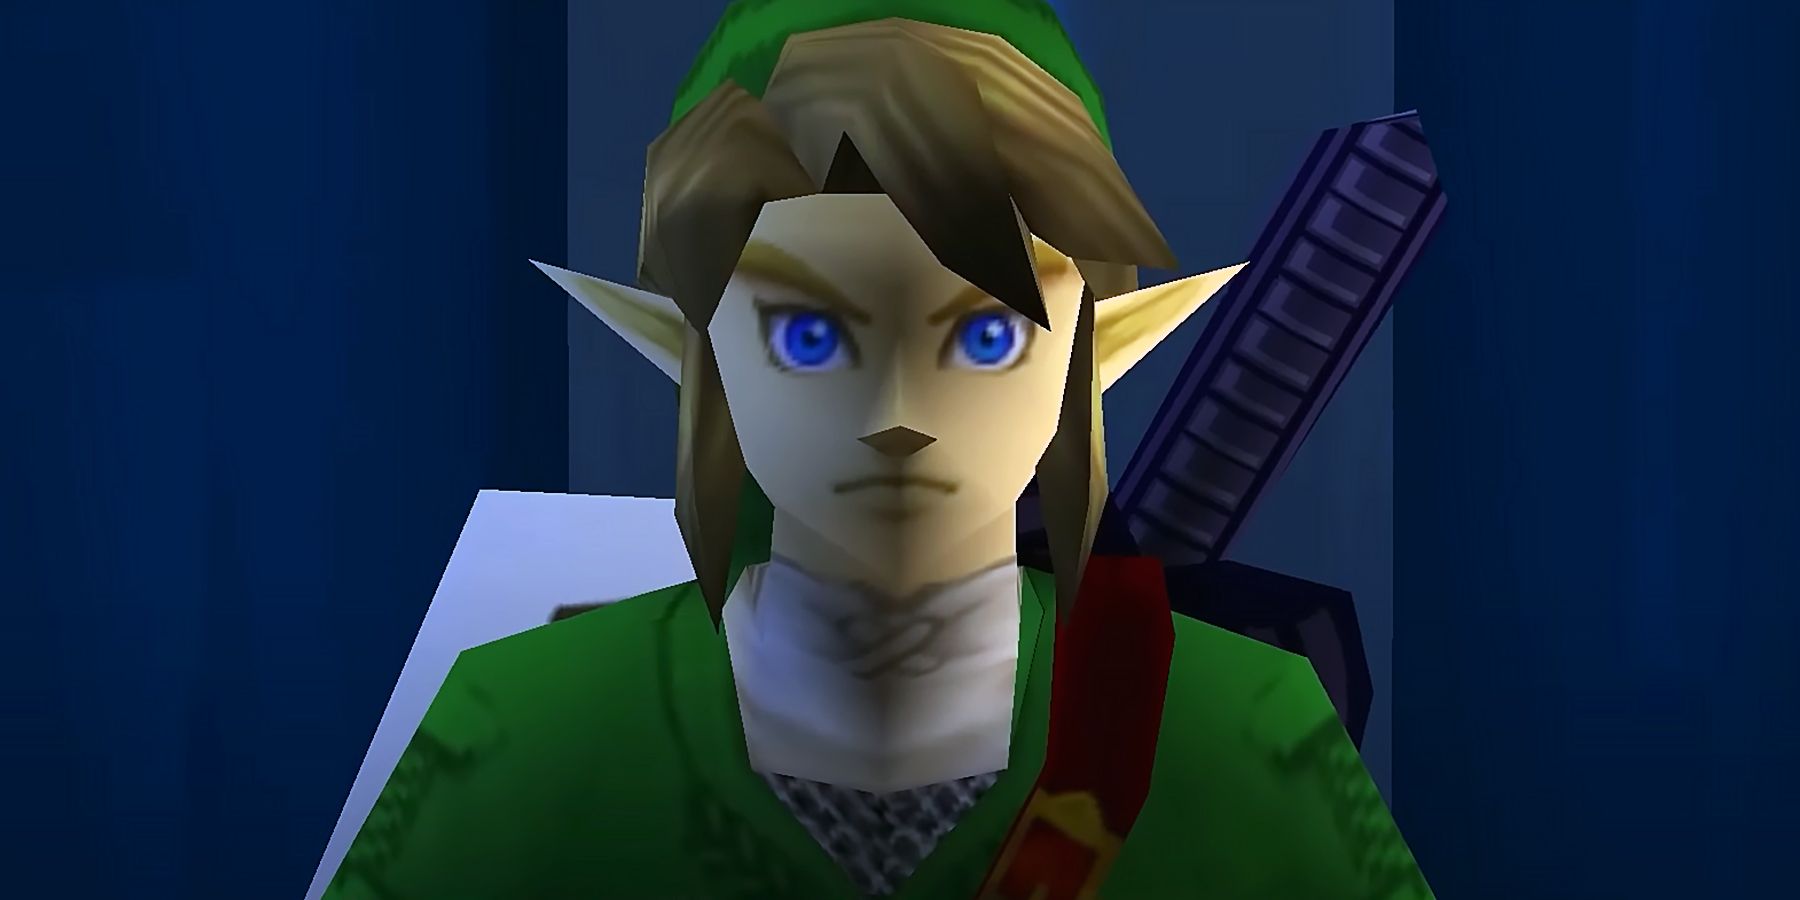 Star Fox 64 ships can be spawned into Zelda: Ocarina of Time without mods